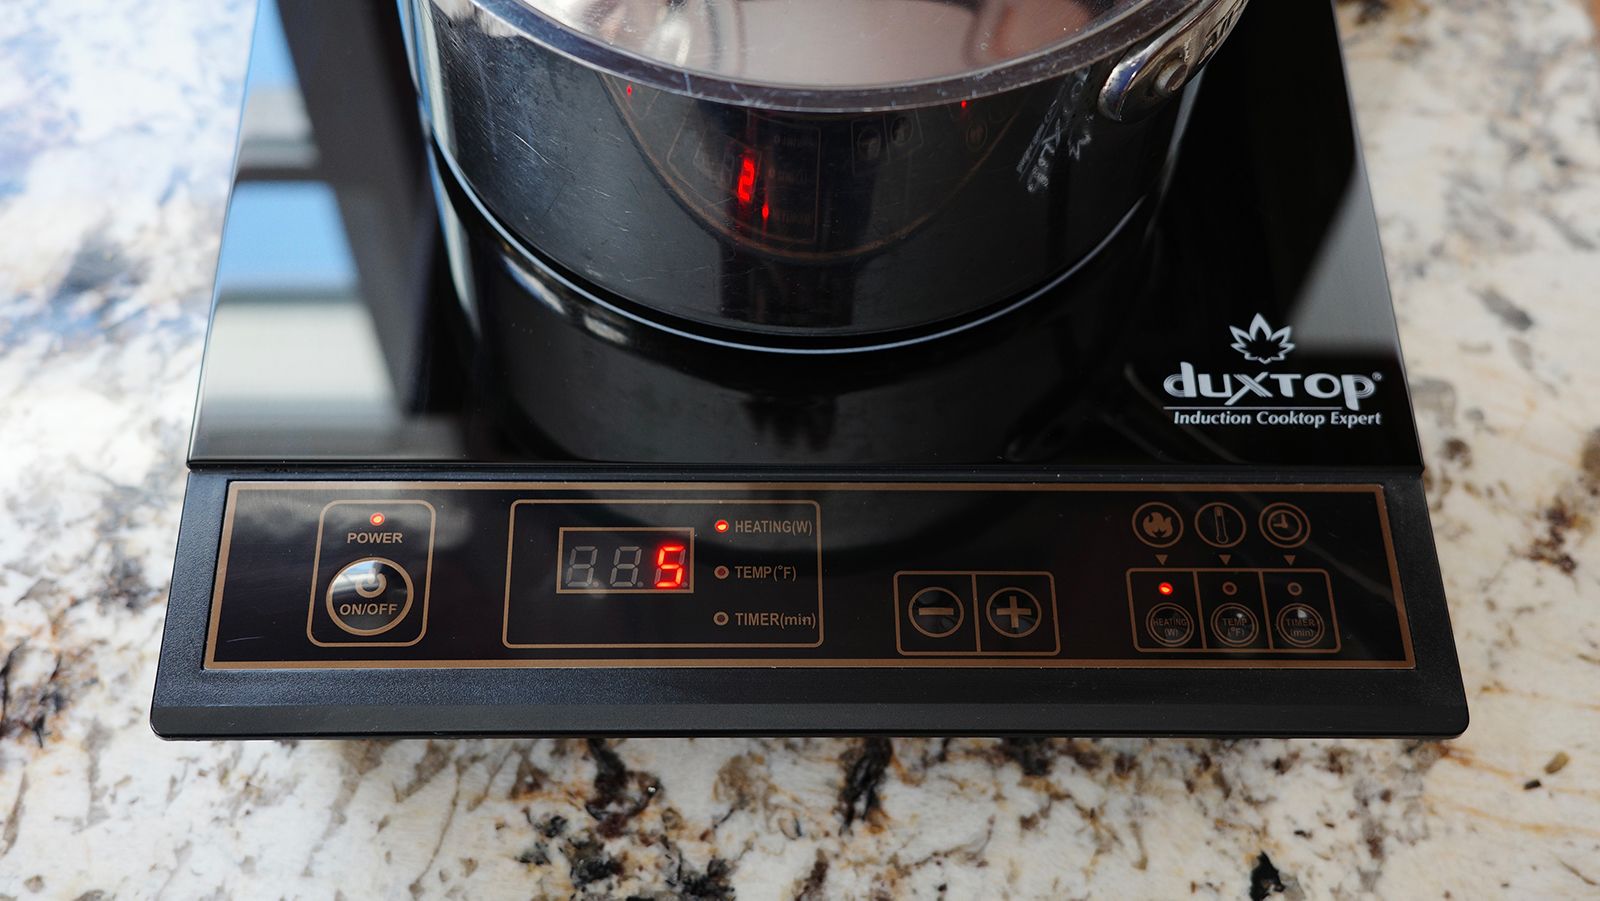 The Best Portable Induction Cooktops of 2023